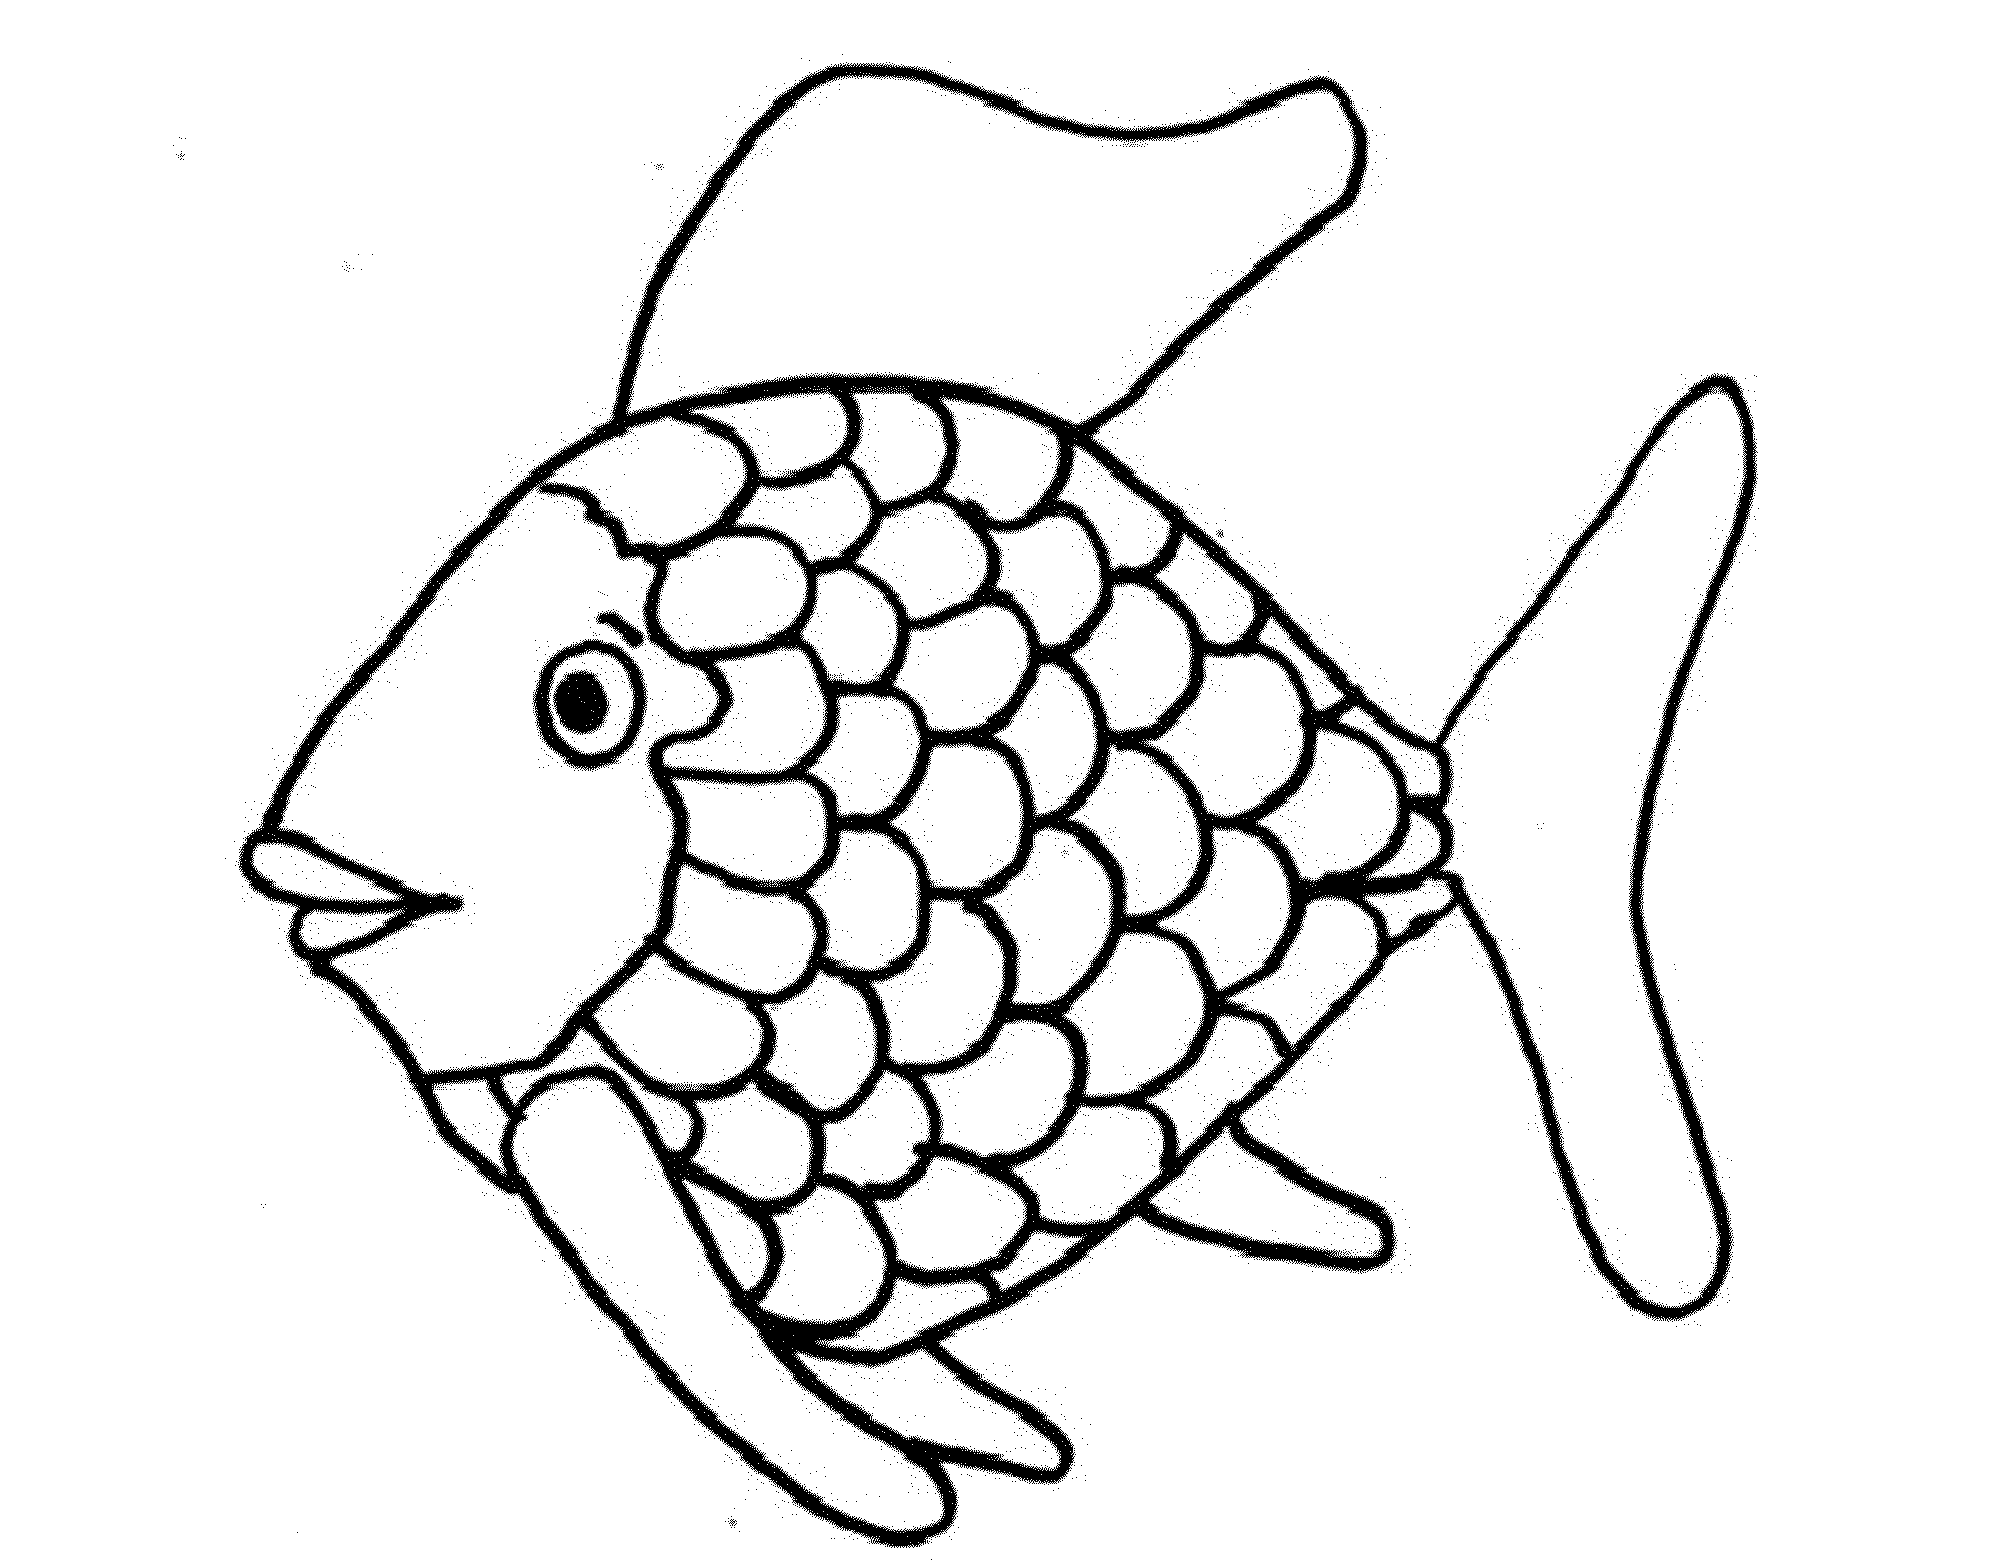 Fine Cartoon Fish Coloring Page Sheet Wecoloringpage.com - Coloring Pages